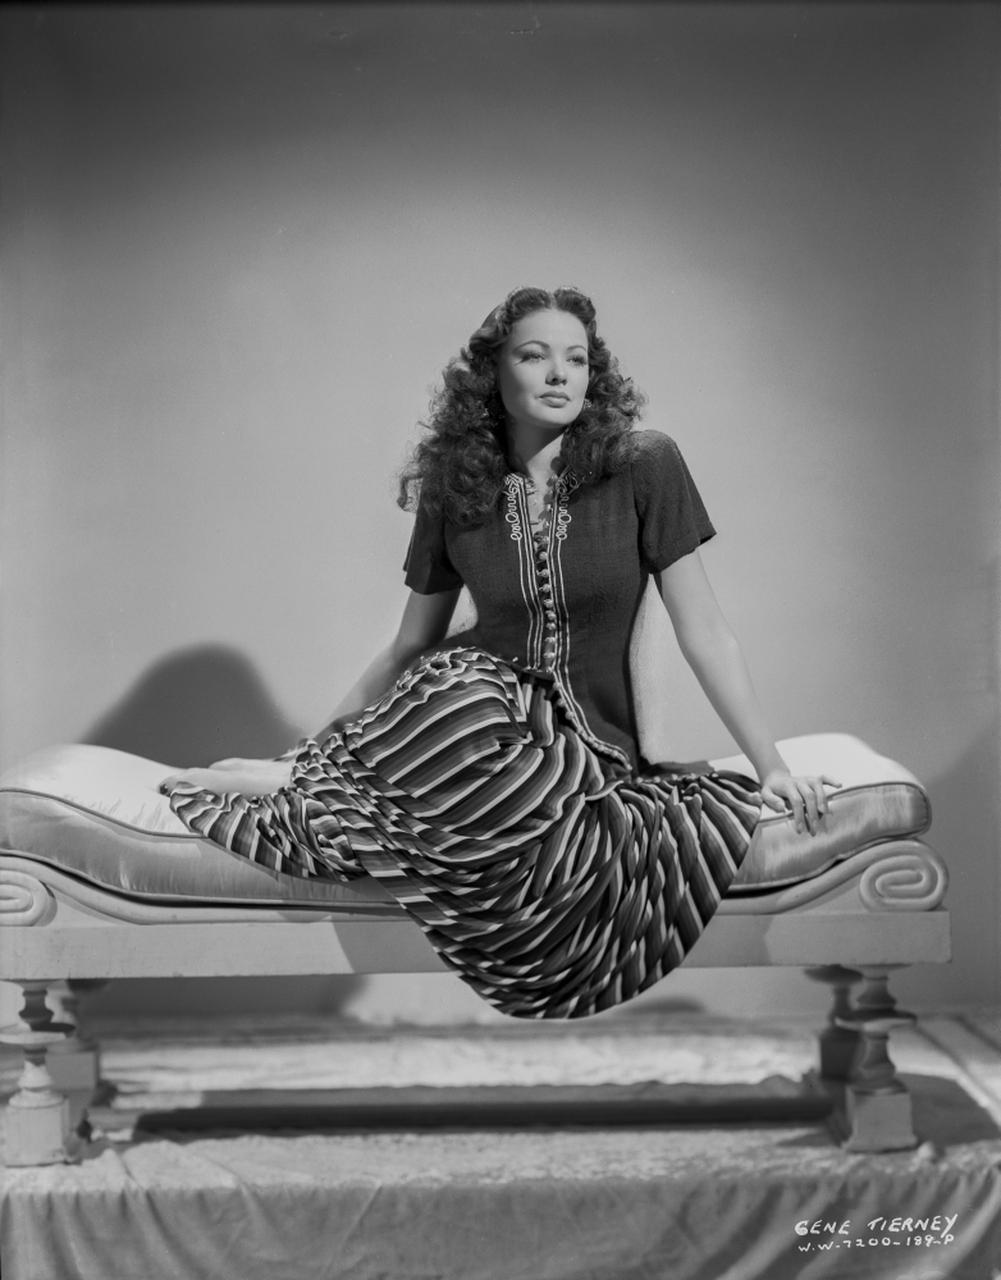 Gene Tierney Seated on Lounging Chair Photo Print # VARCEL708865